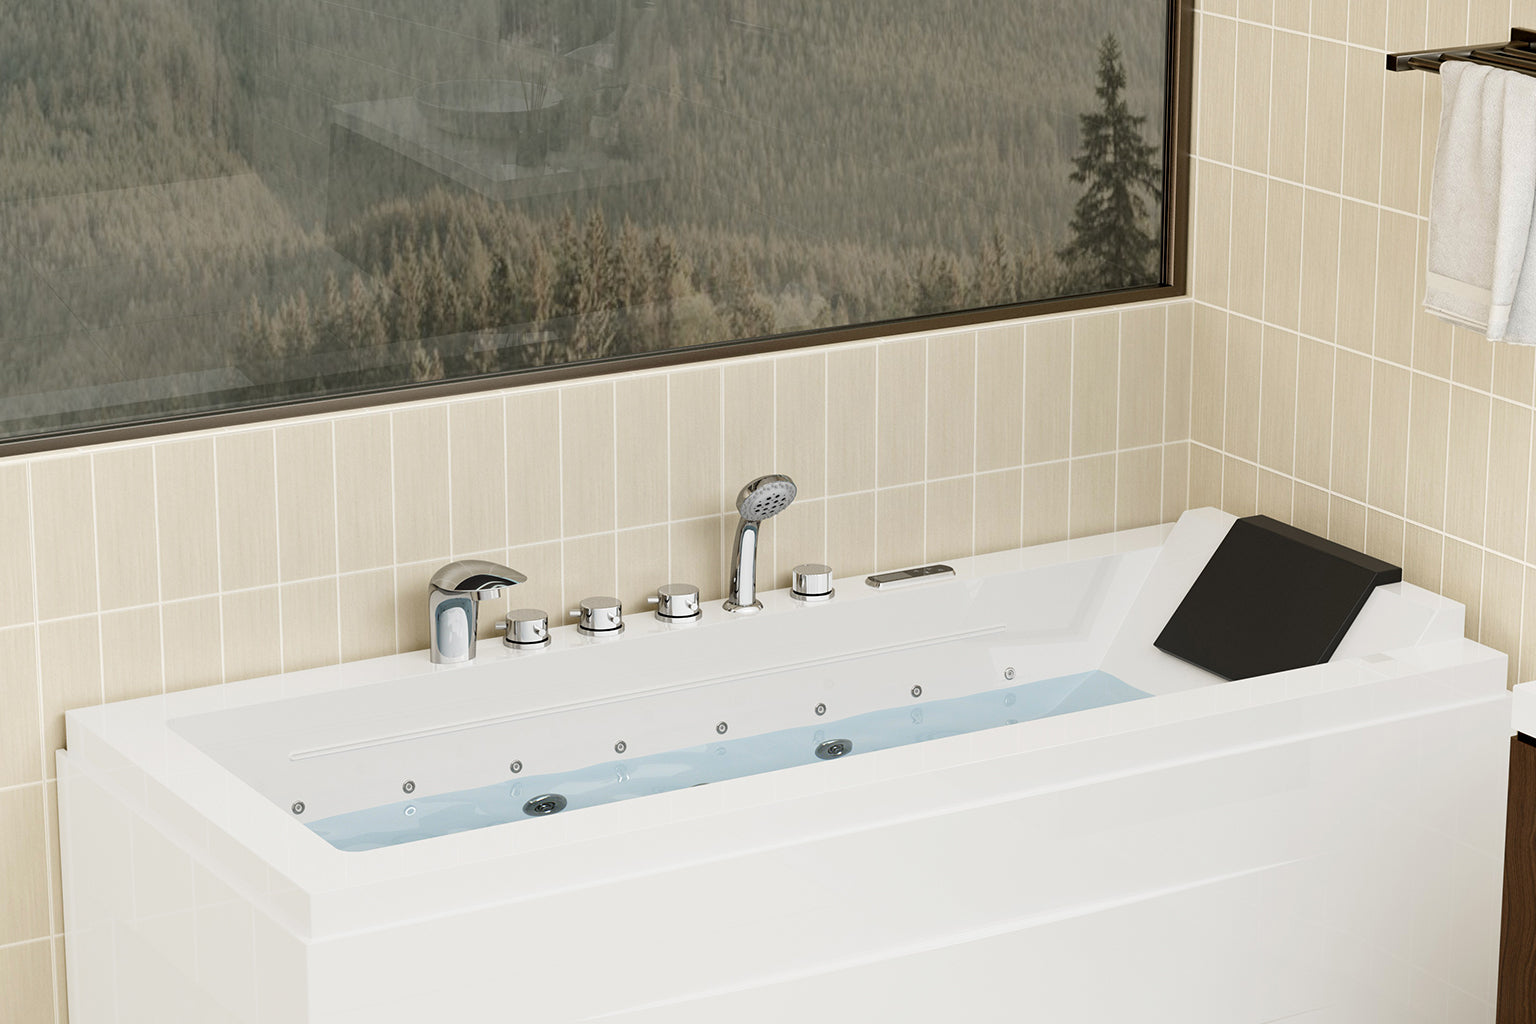 An Expert Guide to Bathtub Reglazing: Costs, Process, and More